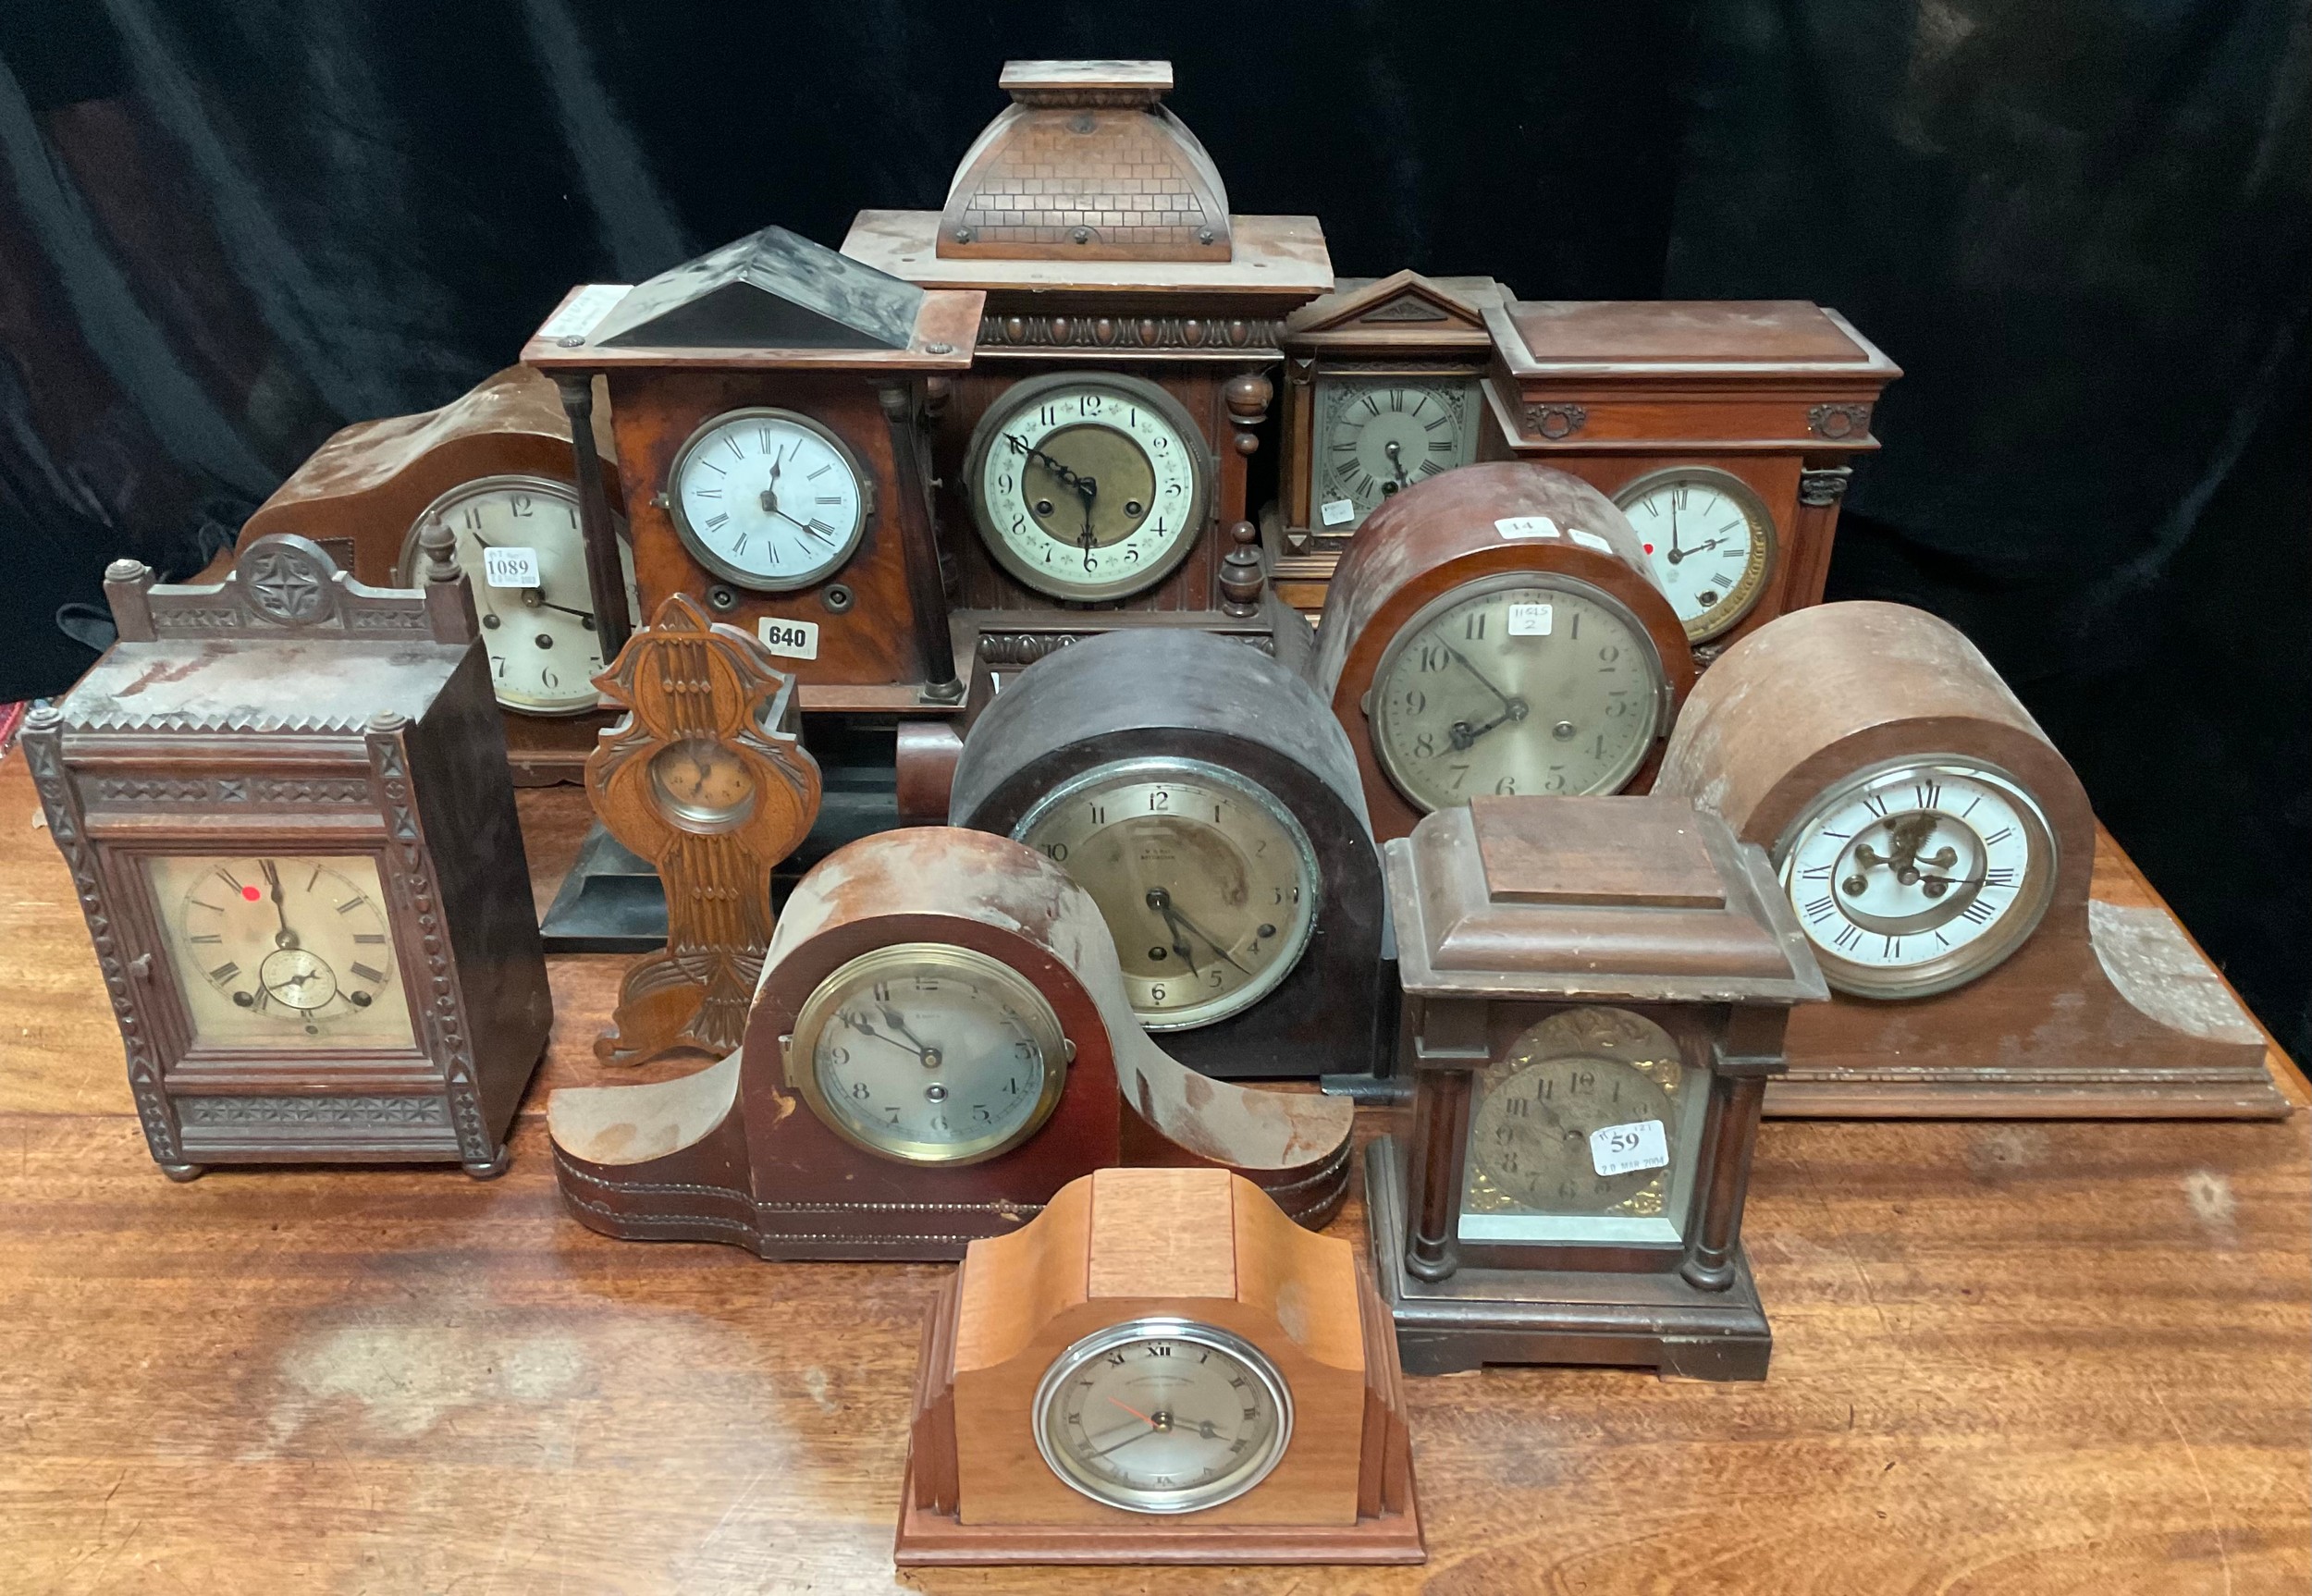 Clocks - early to mid 20th century mantel clocks, others, architectural, etc (13)